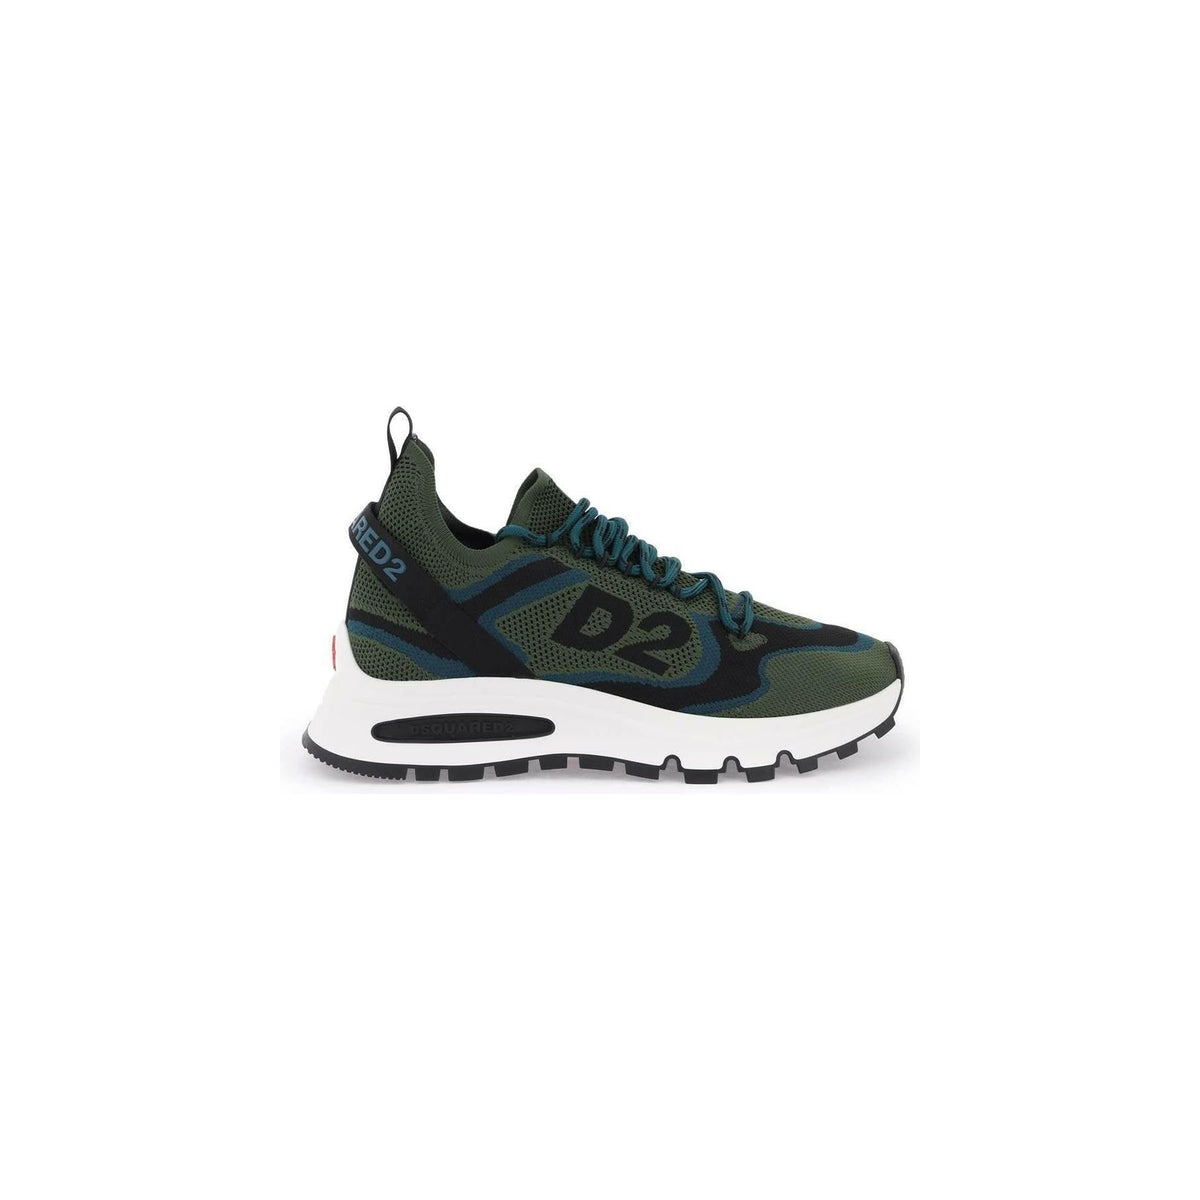 Military Teal Black Recycled Fabric Run Ds2 Sneakers DSQUARED2 JOHN JULIA.